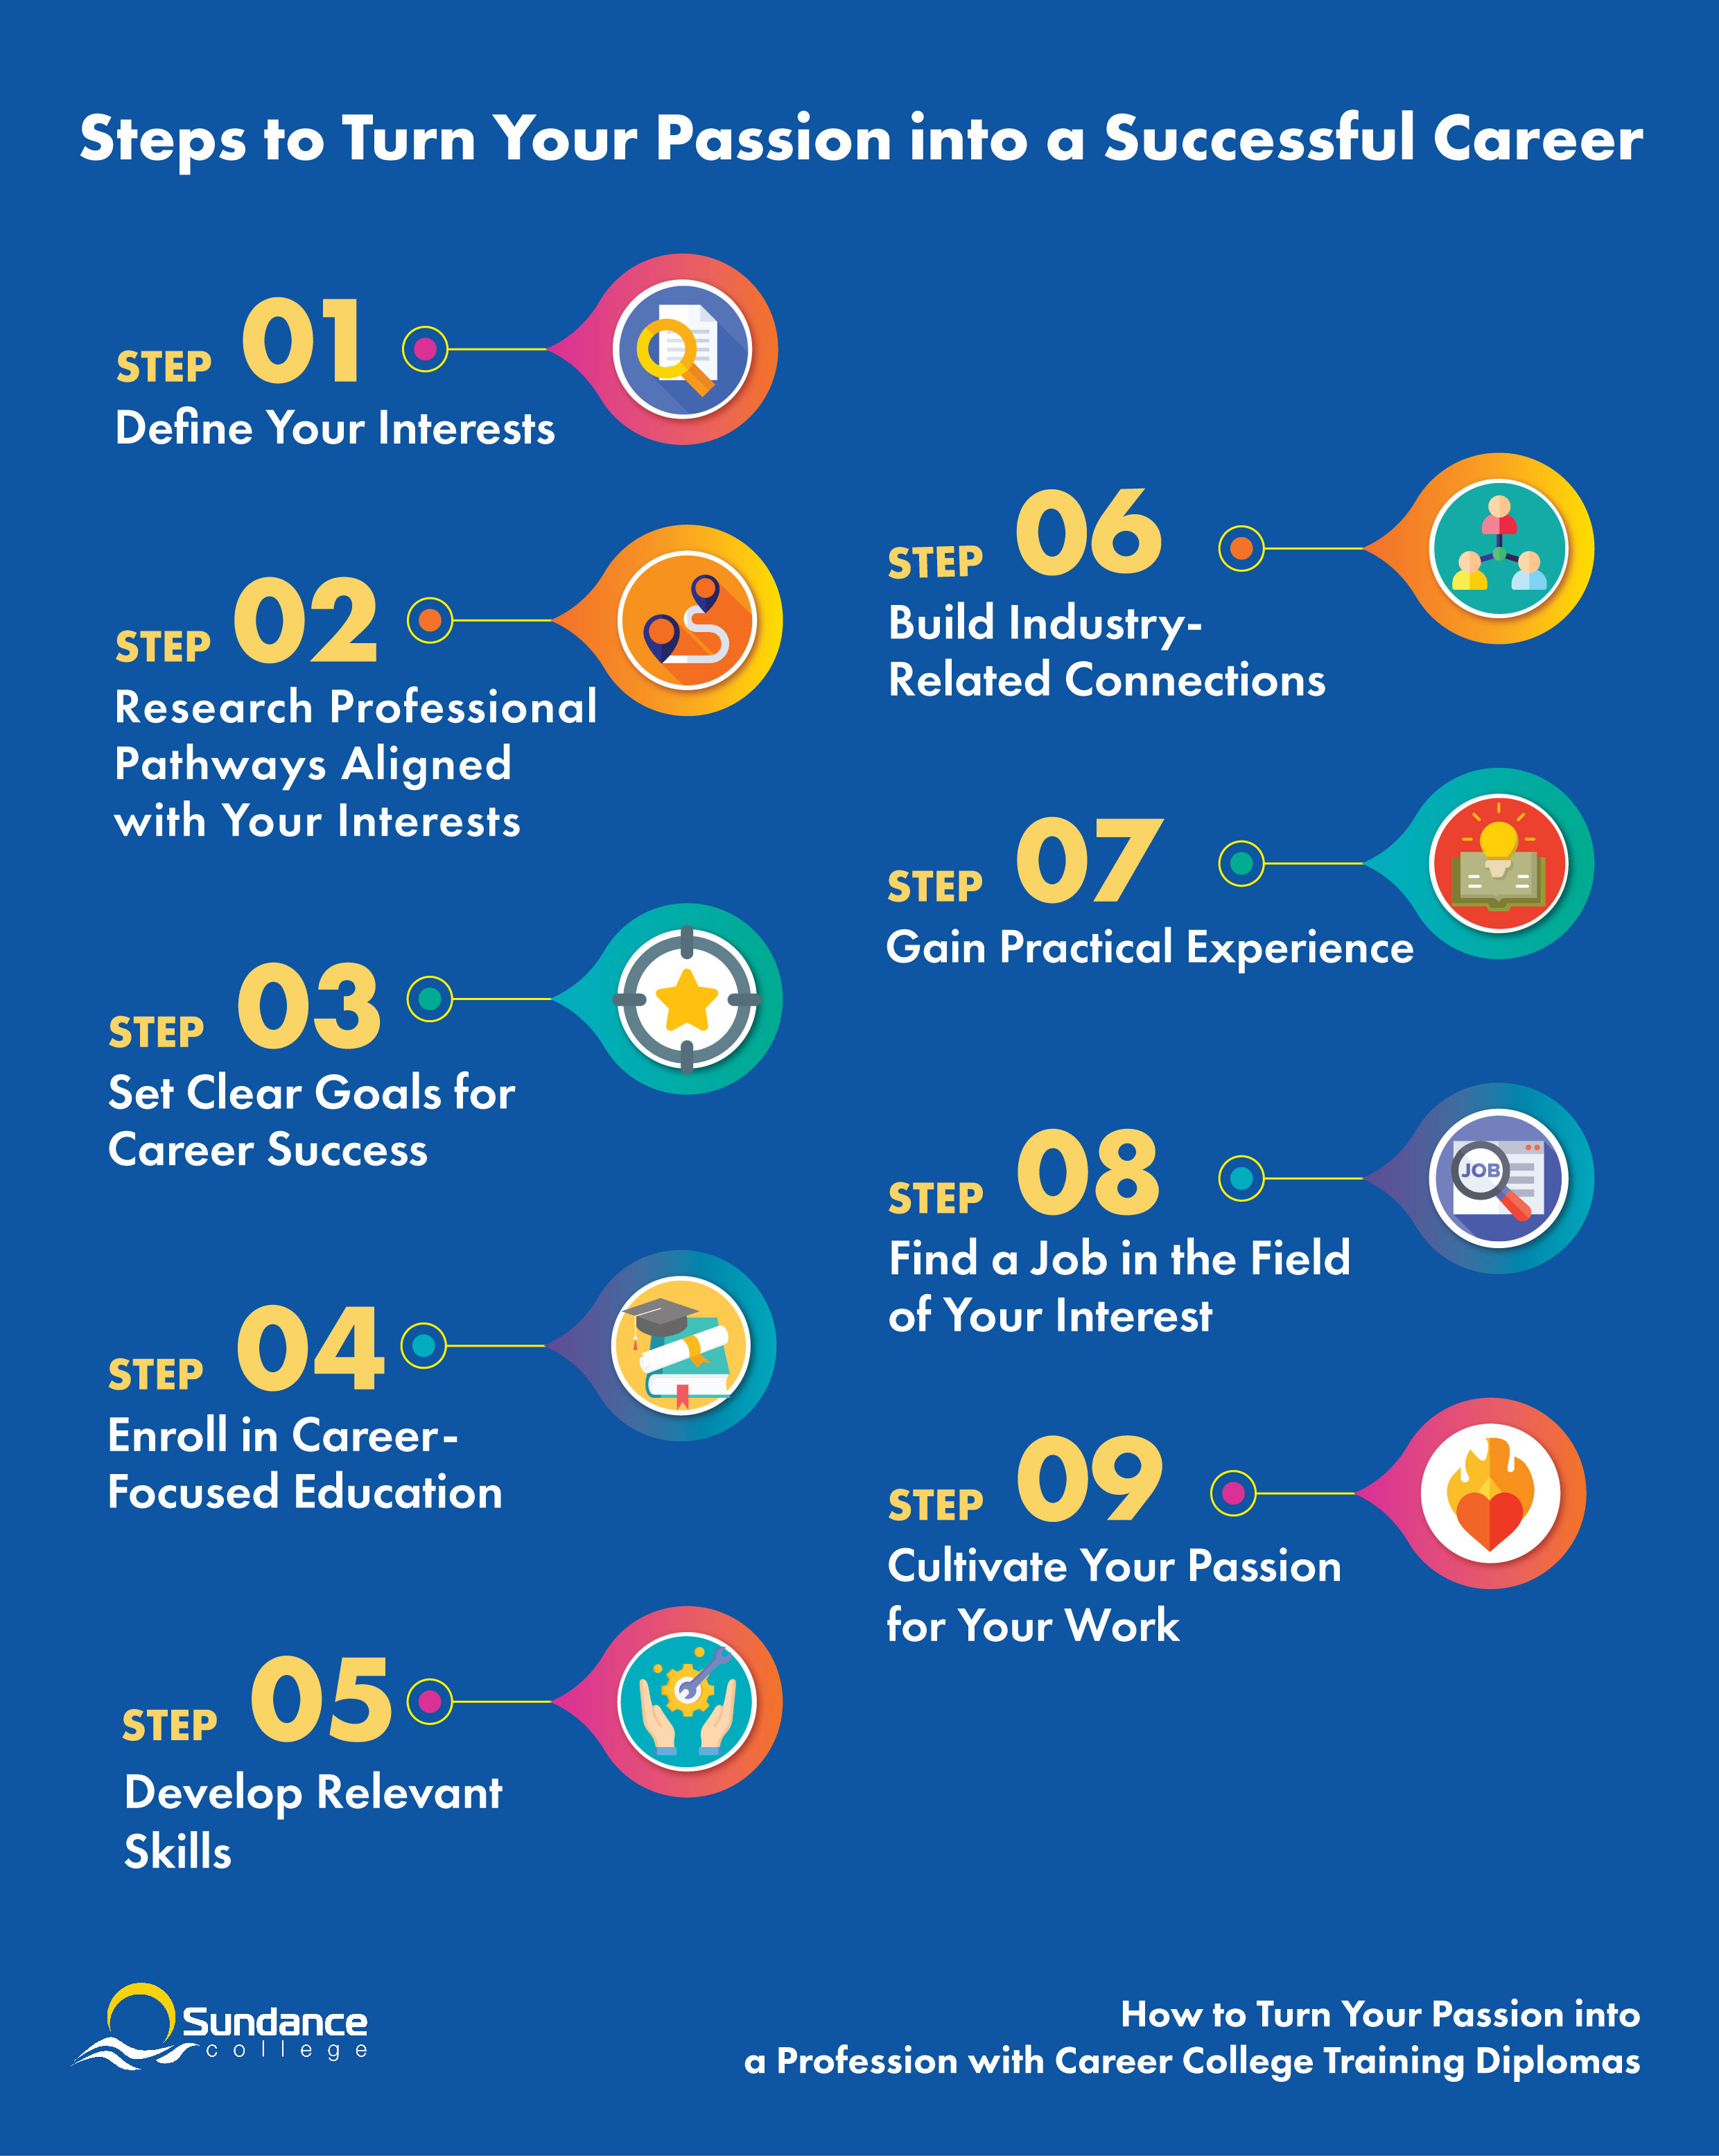 Infographic made by Sundance College about the steps to turn your passion into a successful career.